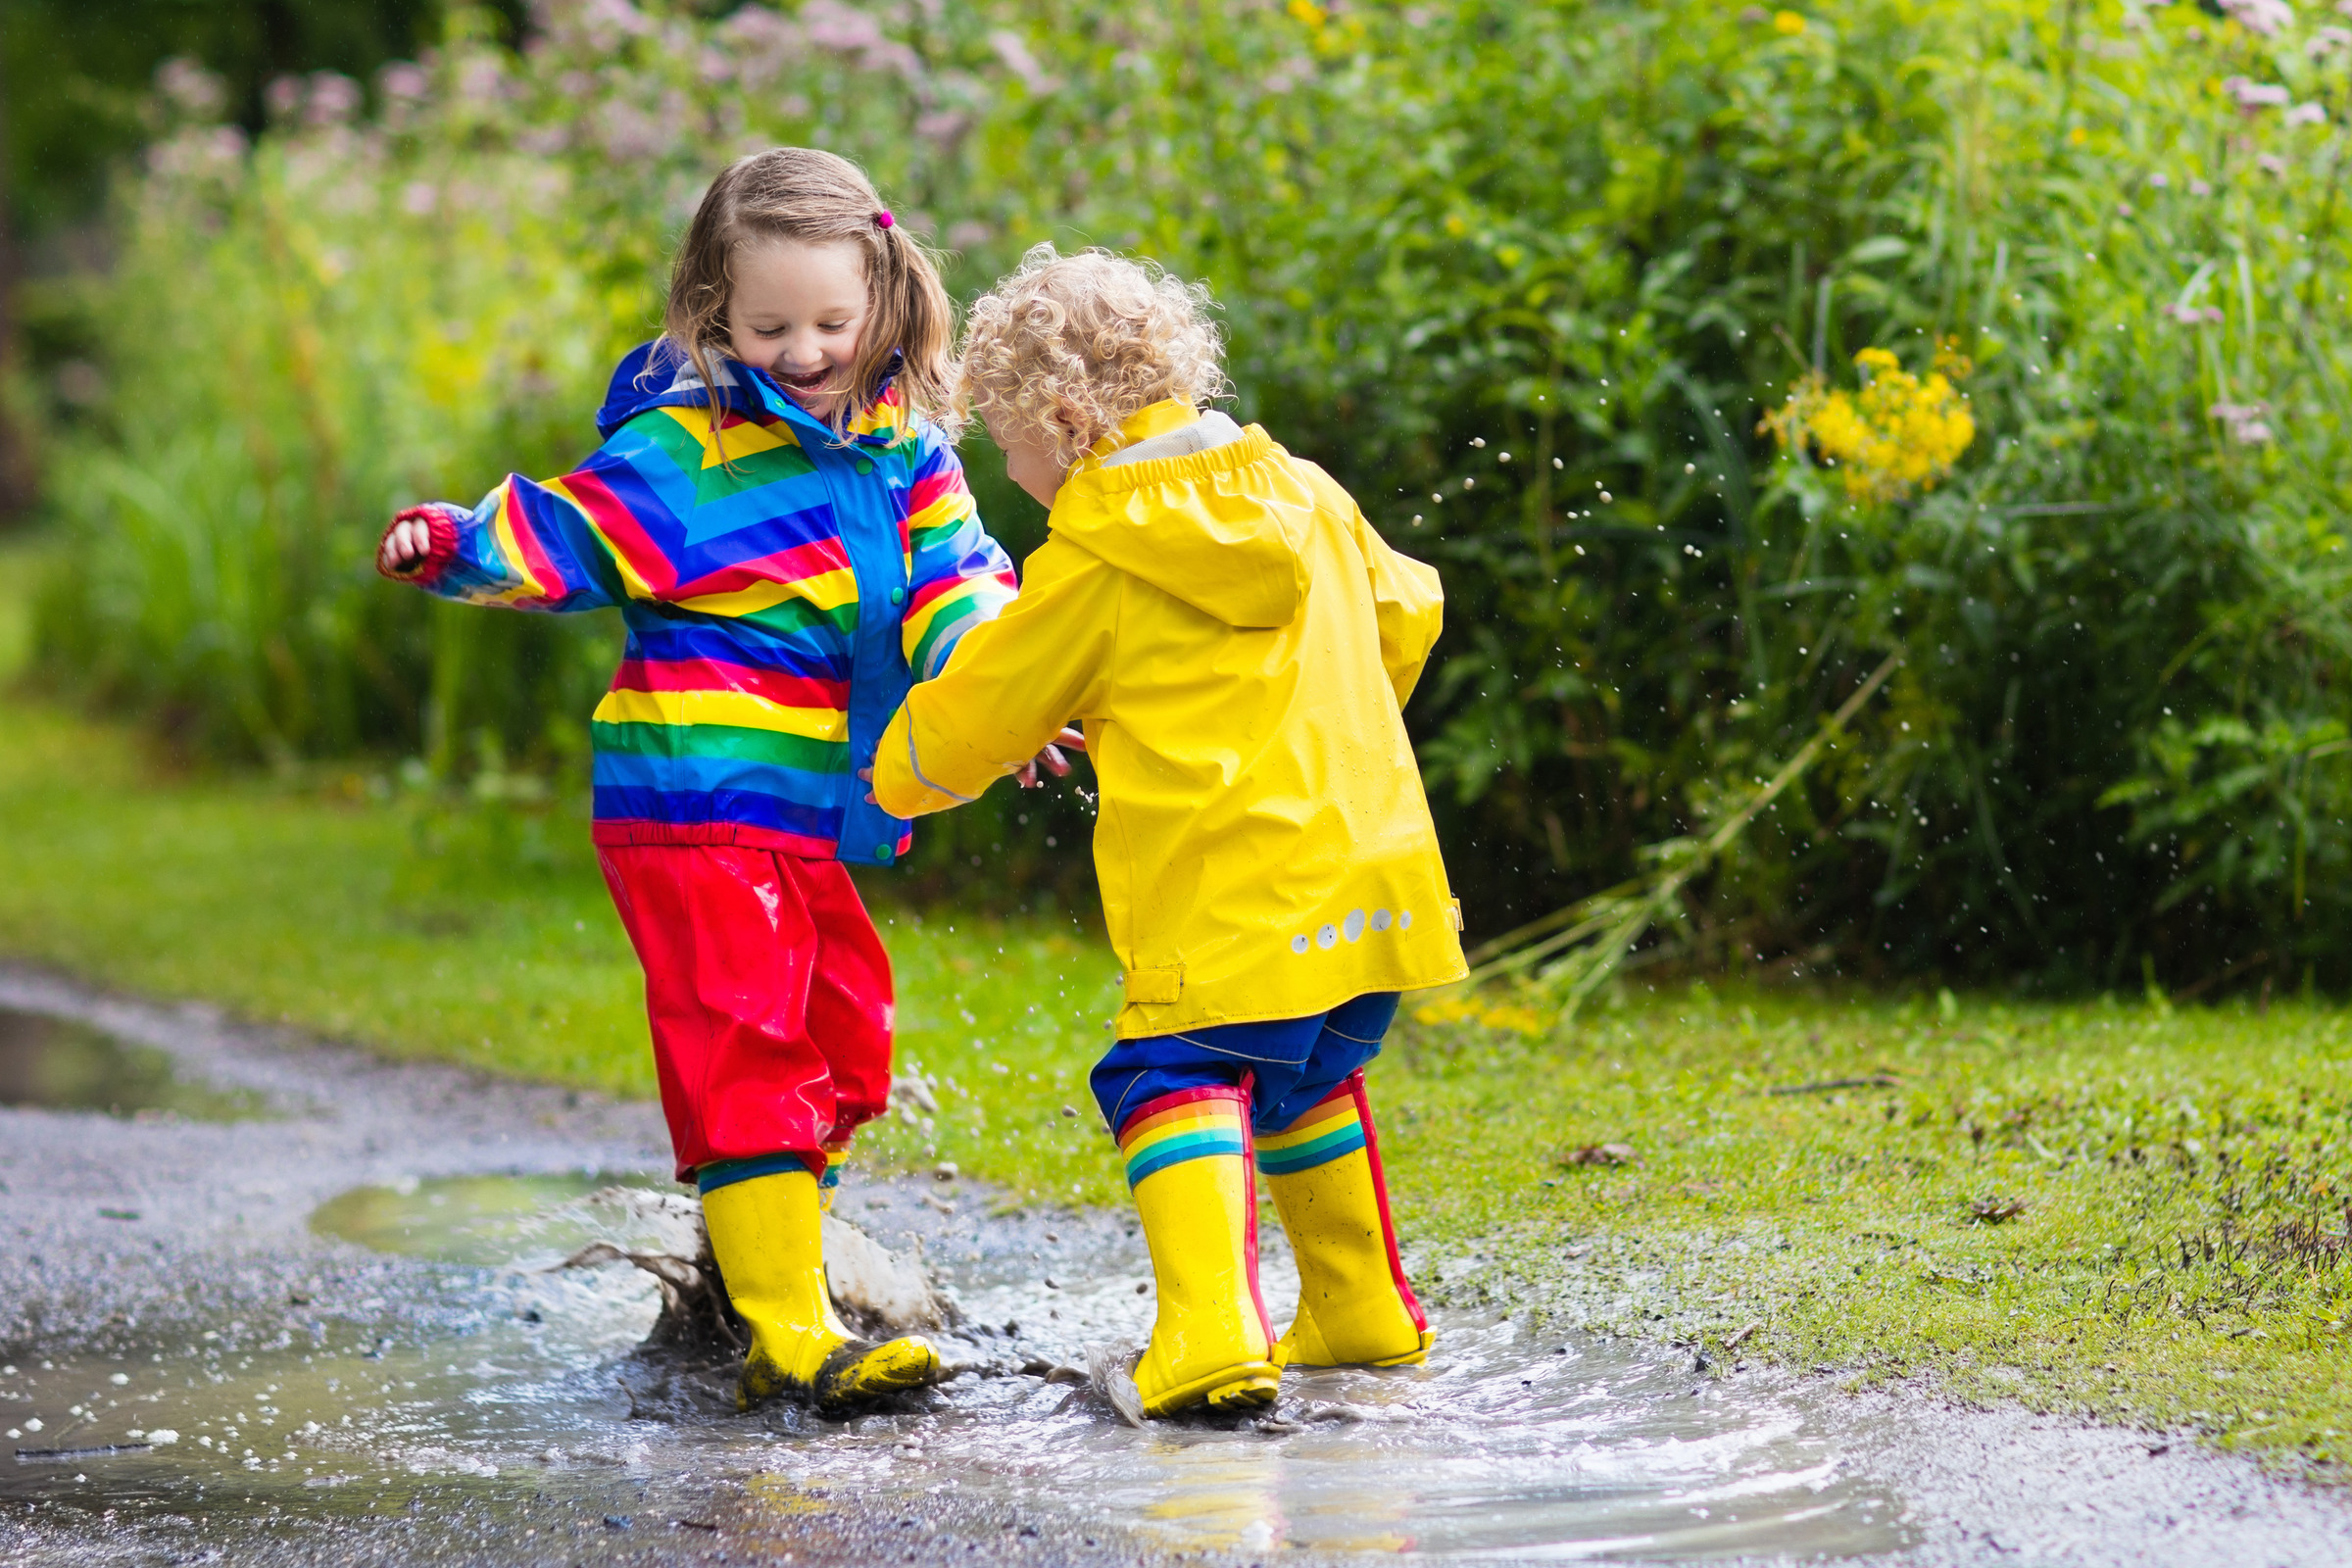 Kids play in rain and puddle in autumn. 